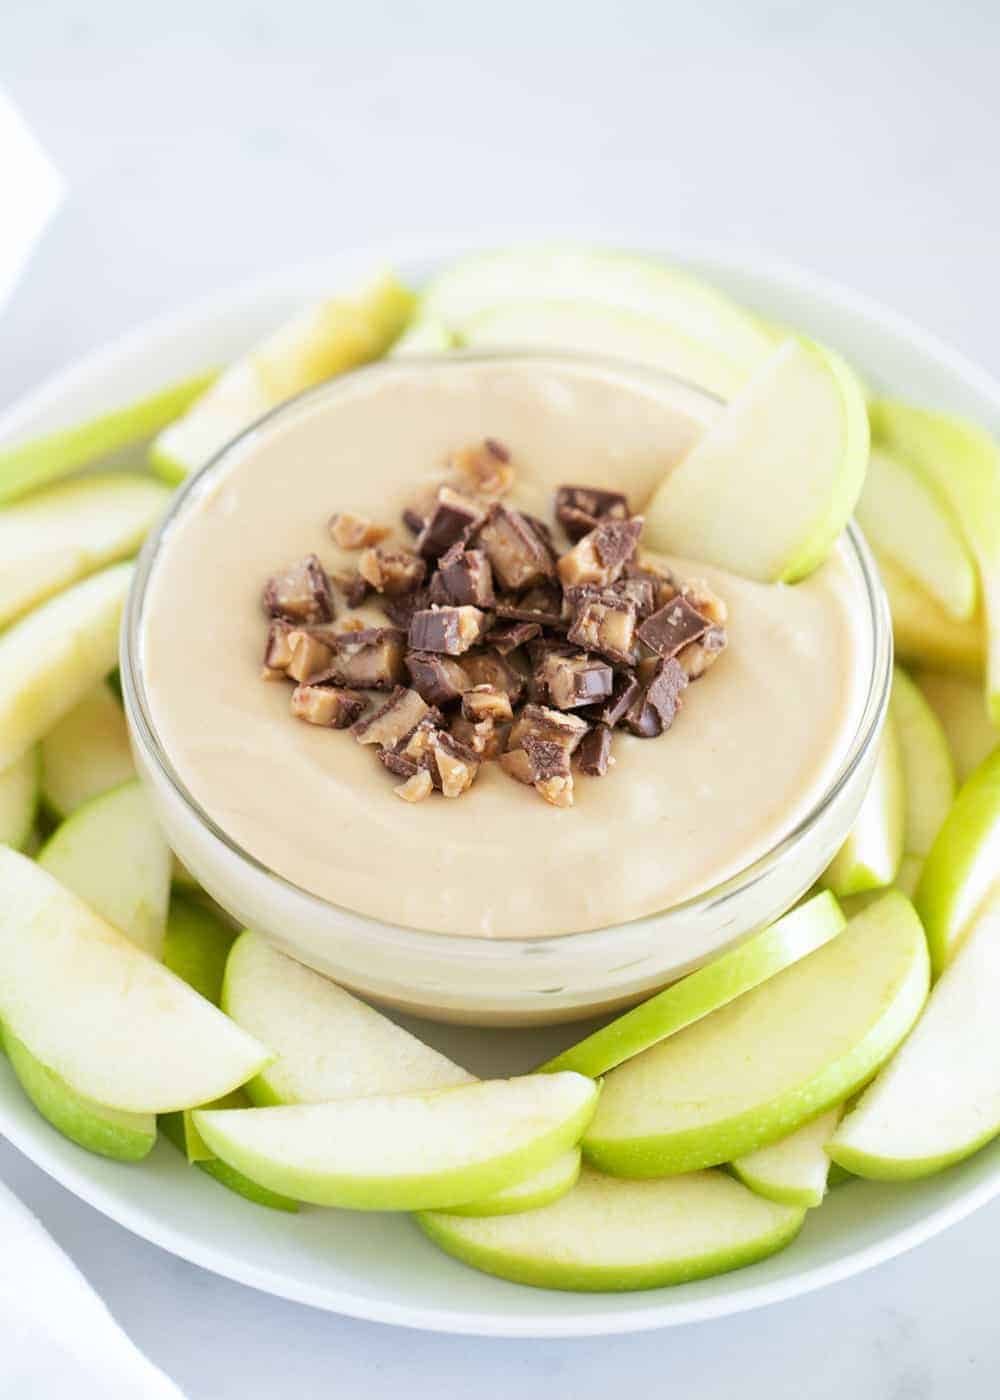 Sliced green apples and toffee caramel dip.